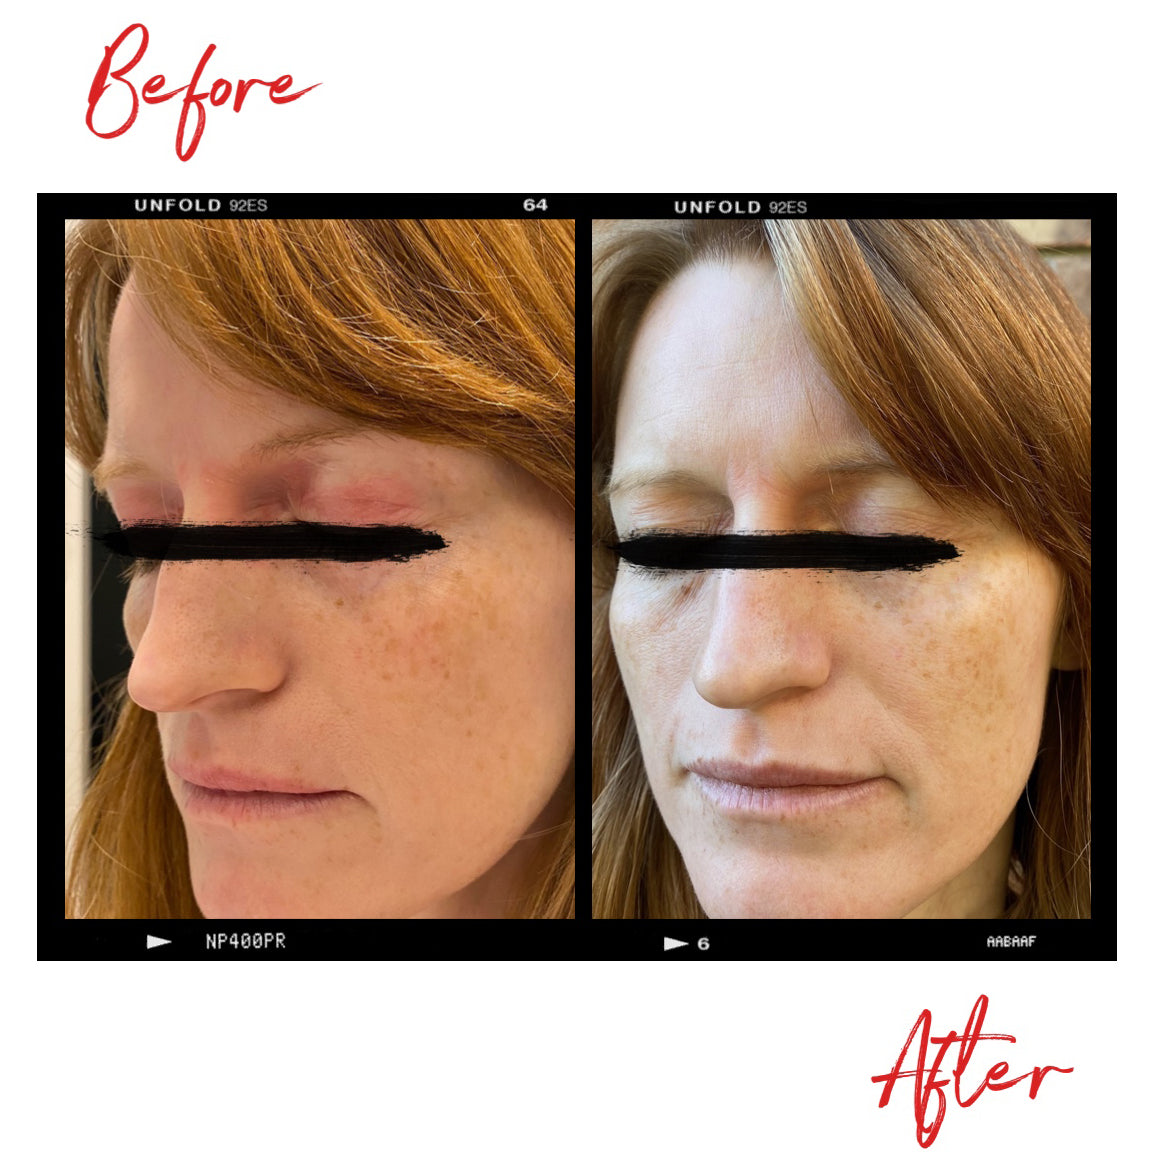 Images of a woman's face before A woman's face before and after using Clémence Organics Ultimate SOS Balm. In the after image the quality of the woman's skin is much improved.cs skin care products.